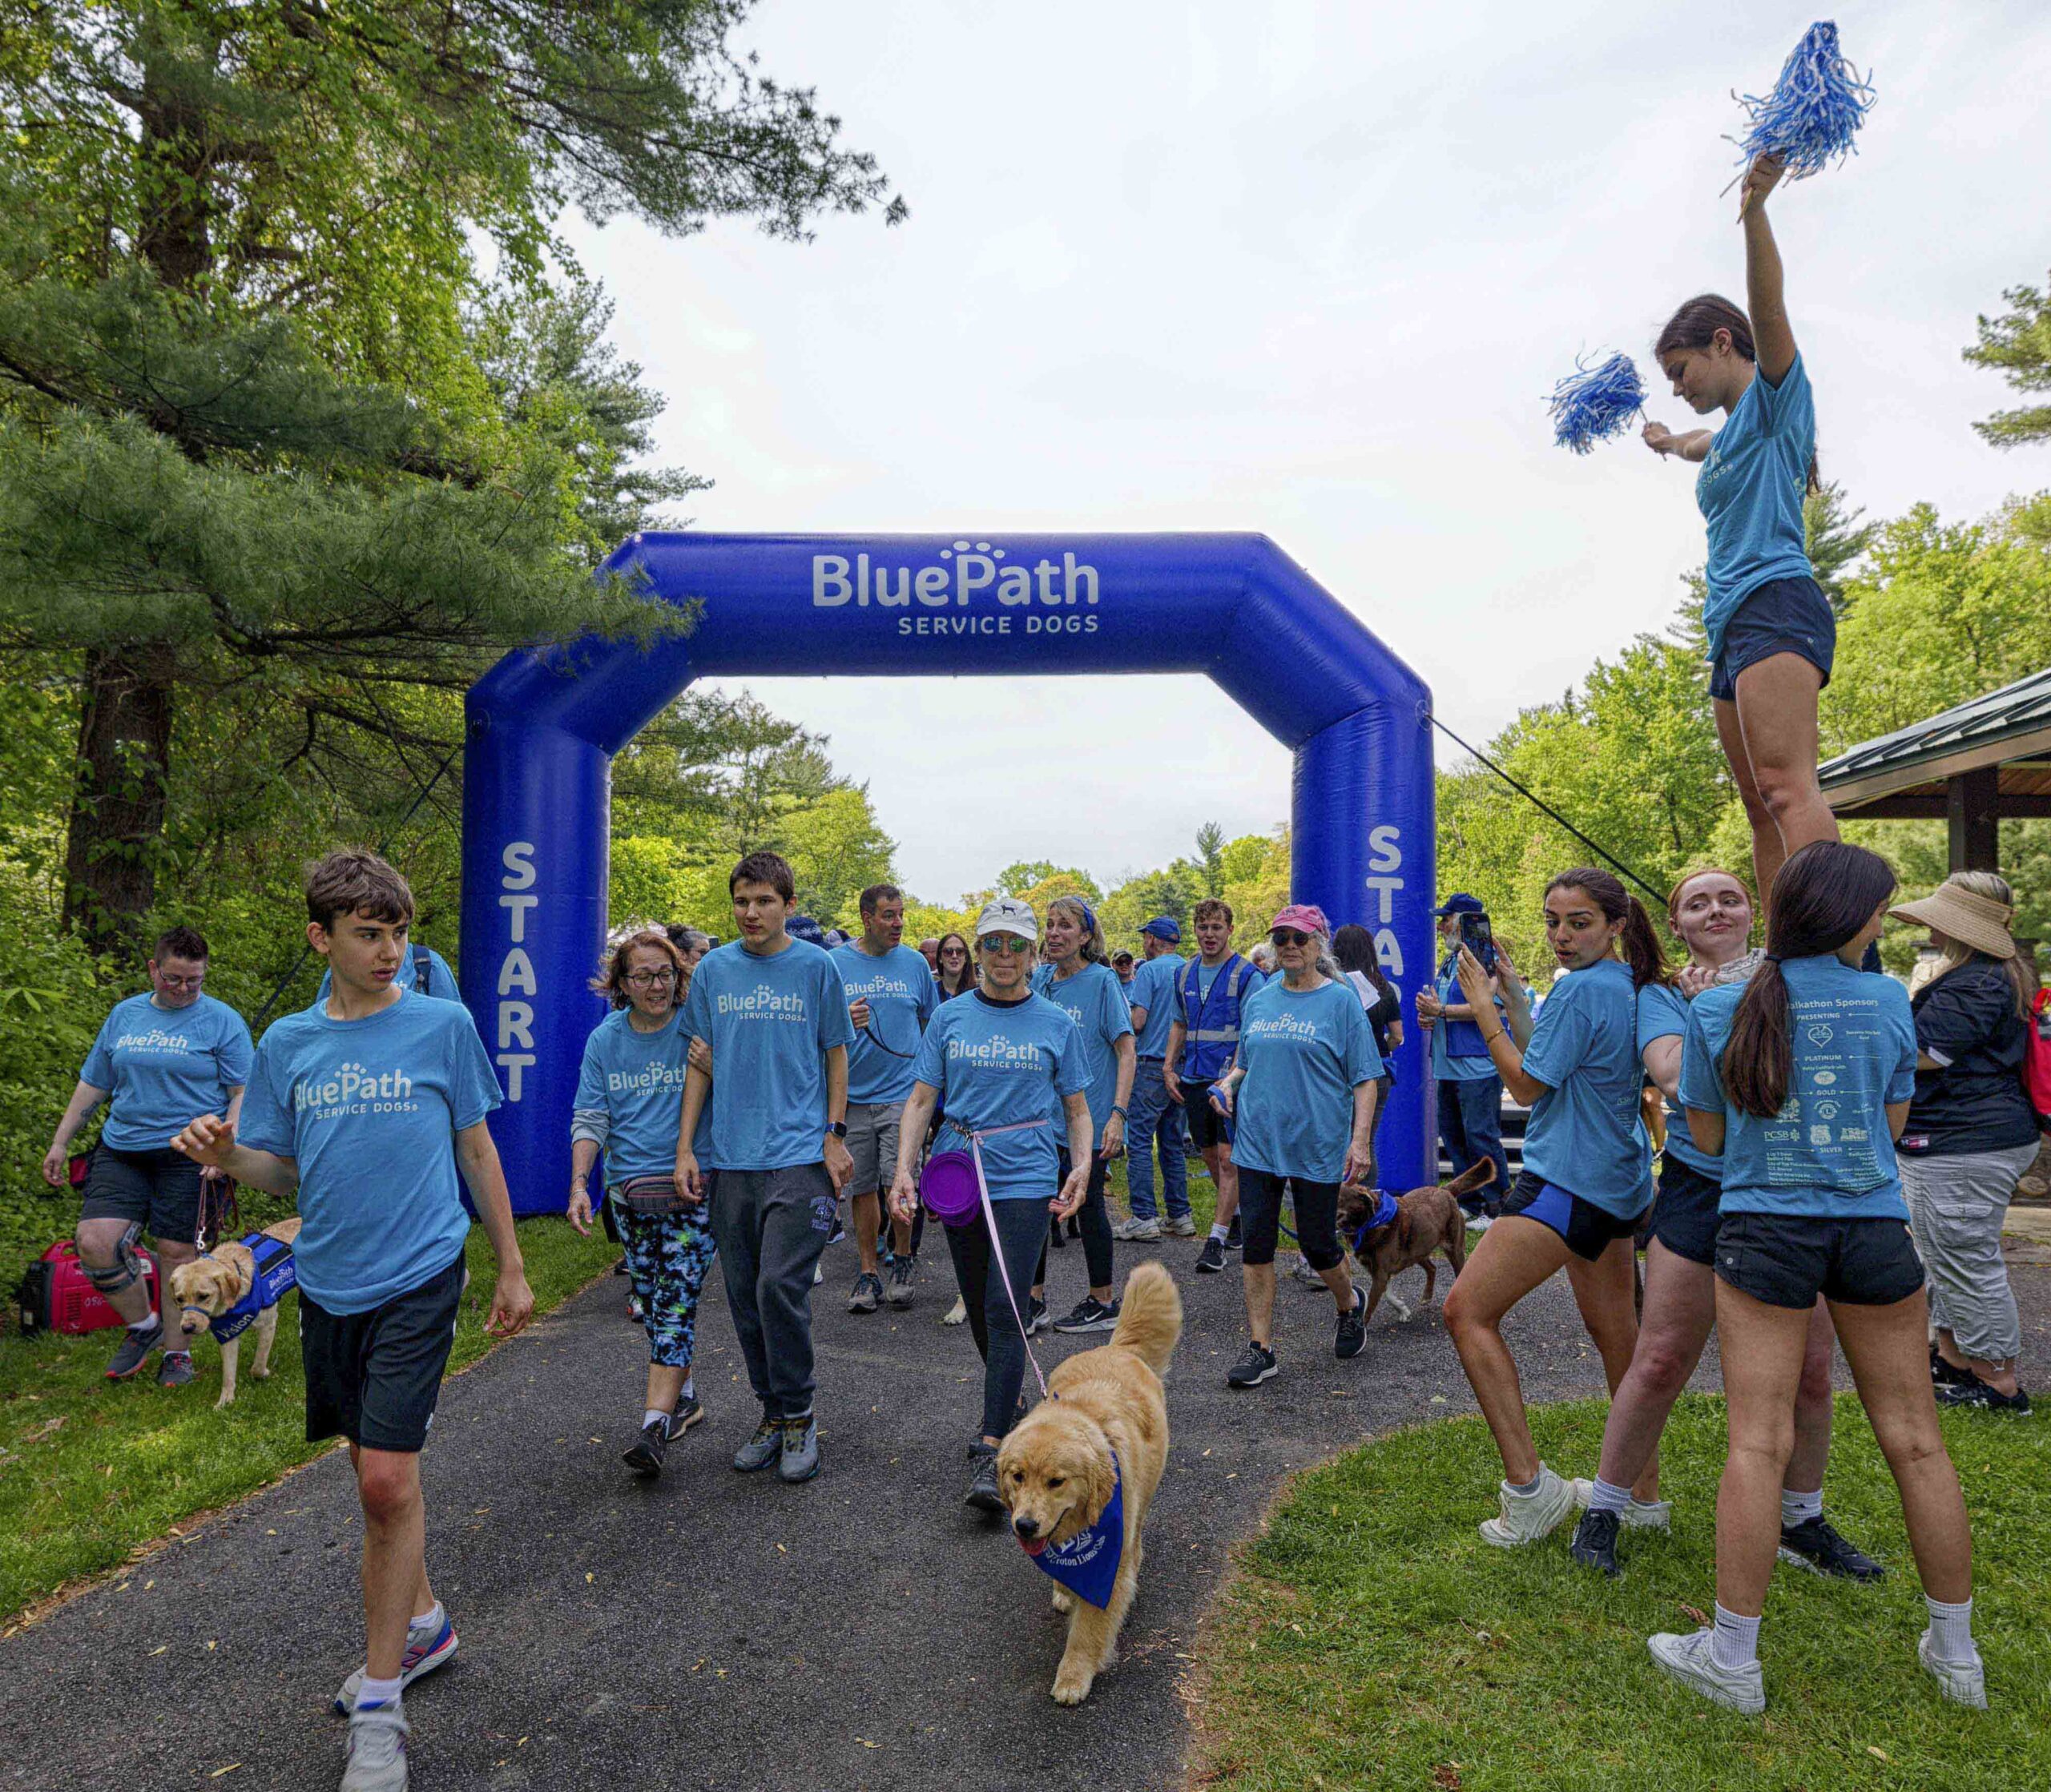 On May 13, 2023 BluePath Service Dogs held their Annual Walkathon at FDR Park in Yorktown. ThinkDIFFERENTLY was a sponsor and tabled at the event, which was attended by hundreds of people and maybe even more pups!! In this picture teams, with their dogs, start their walk with cheerleaders on their left (our right) as they began.